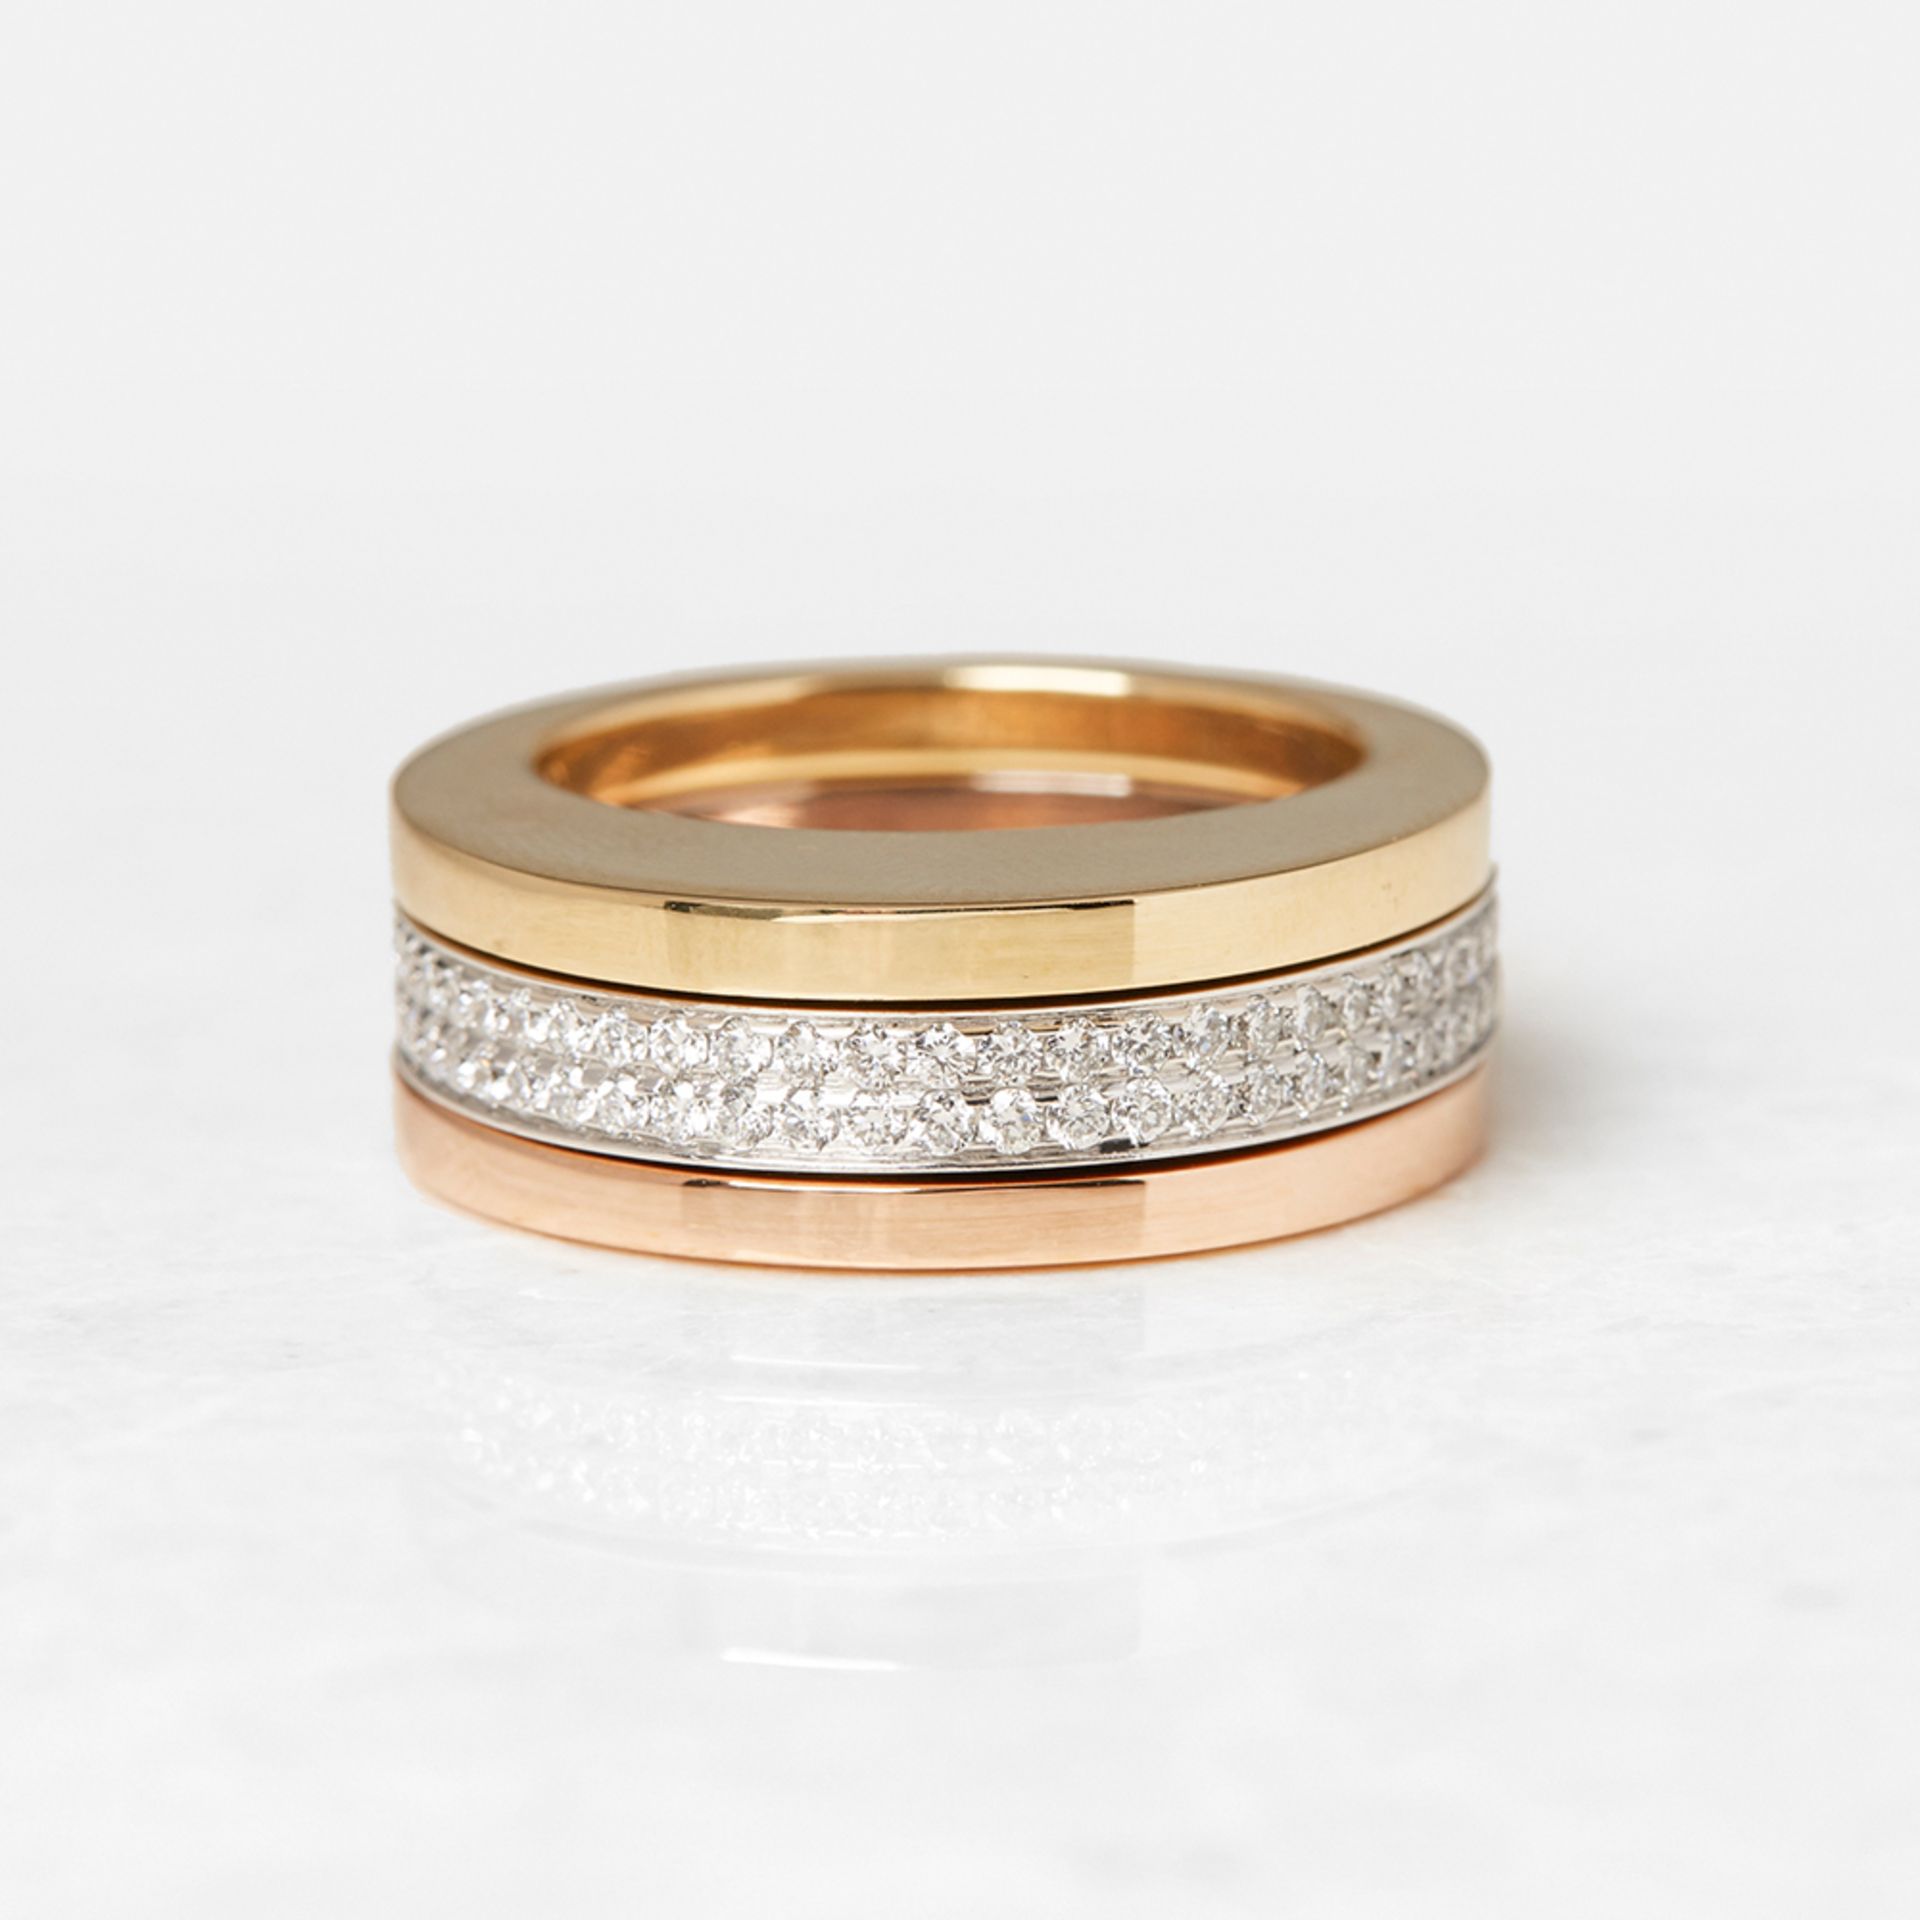 Tiffany & Co. 18k White, Rose & Yellow Gold Stackable Rings - Image 2 of 11